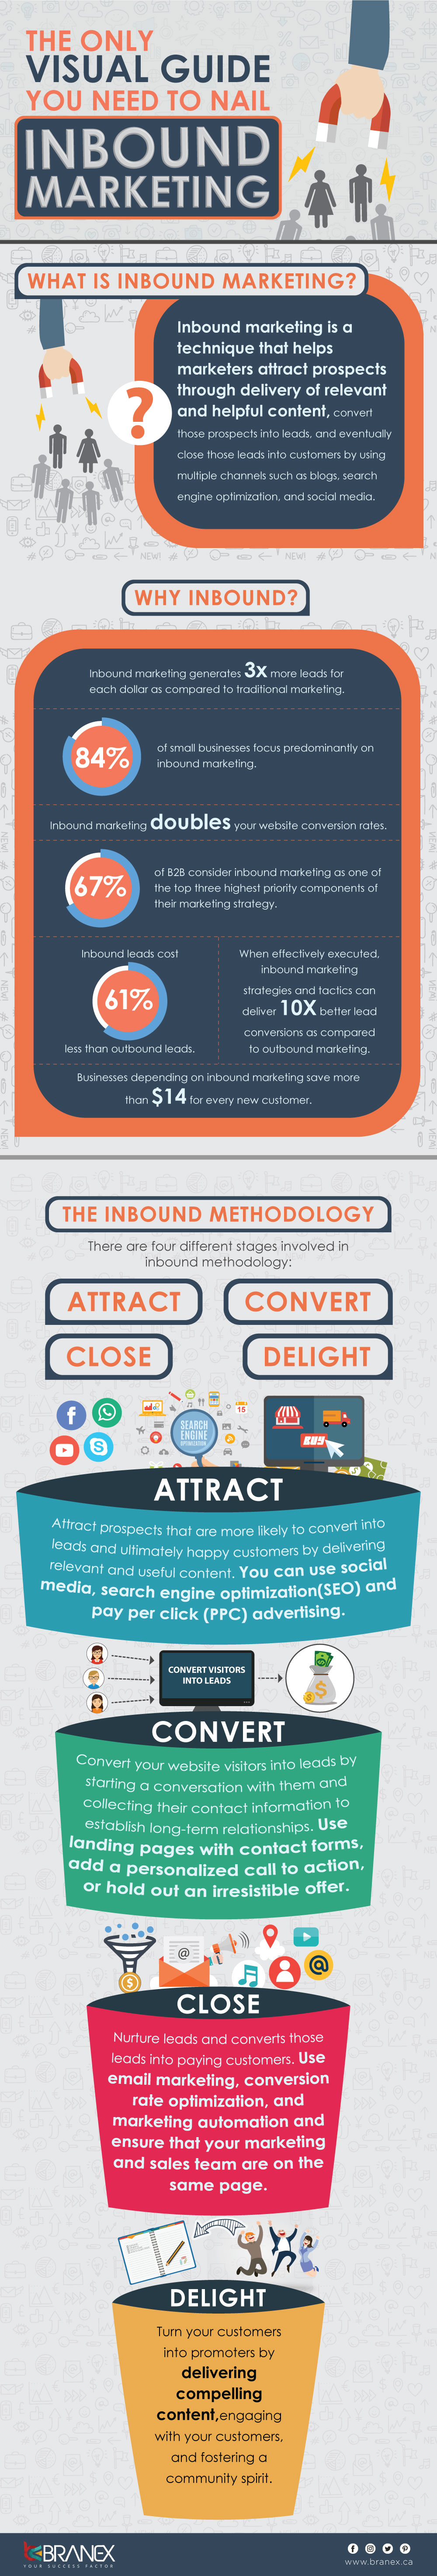 The Only Visual Guide You Need To Nail Inbound Marketing